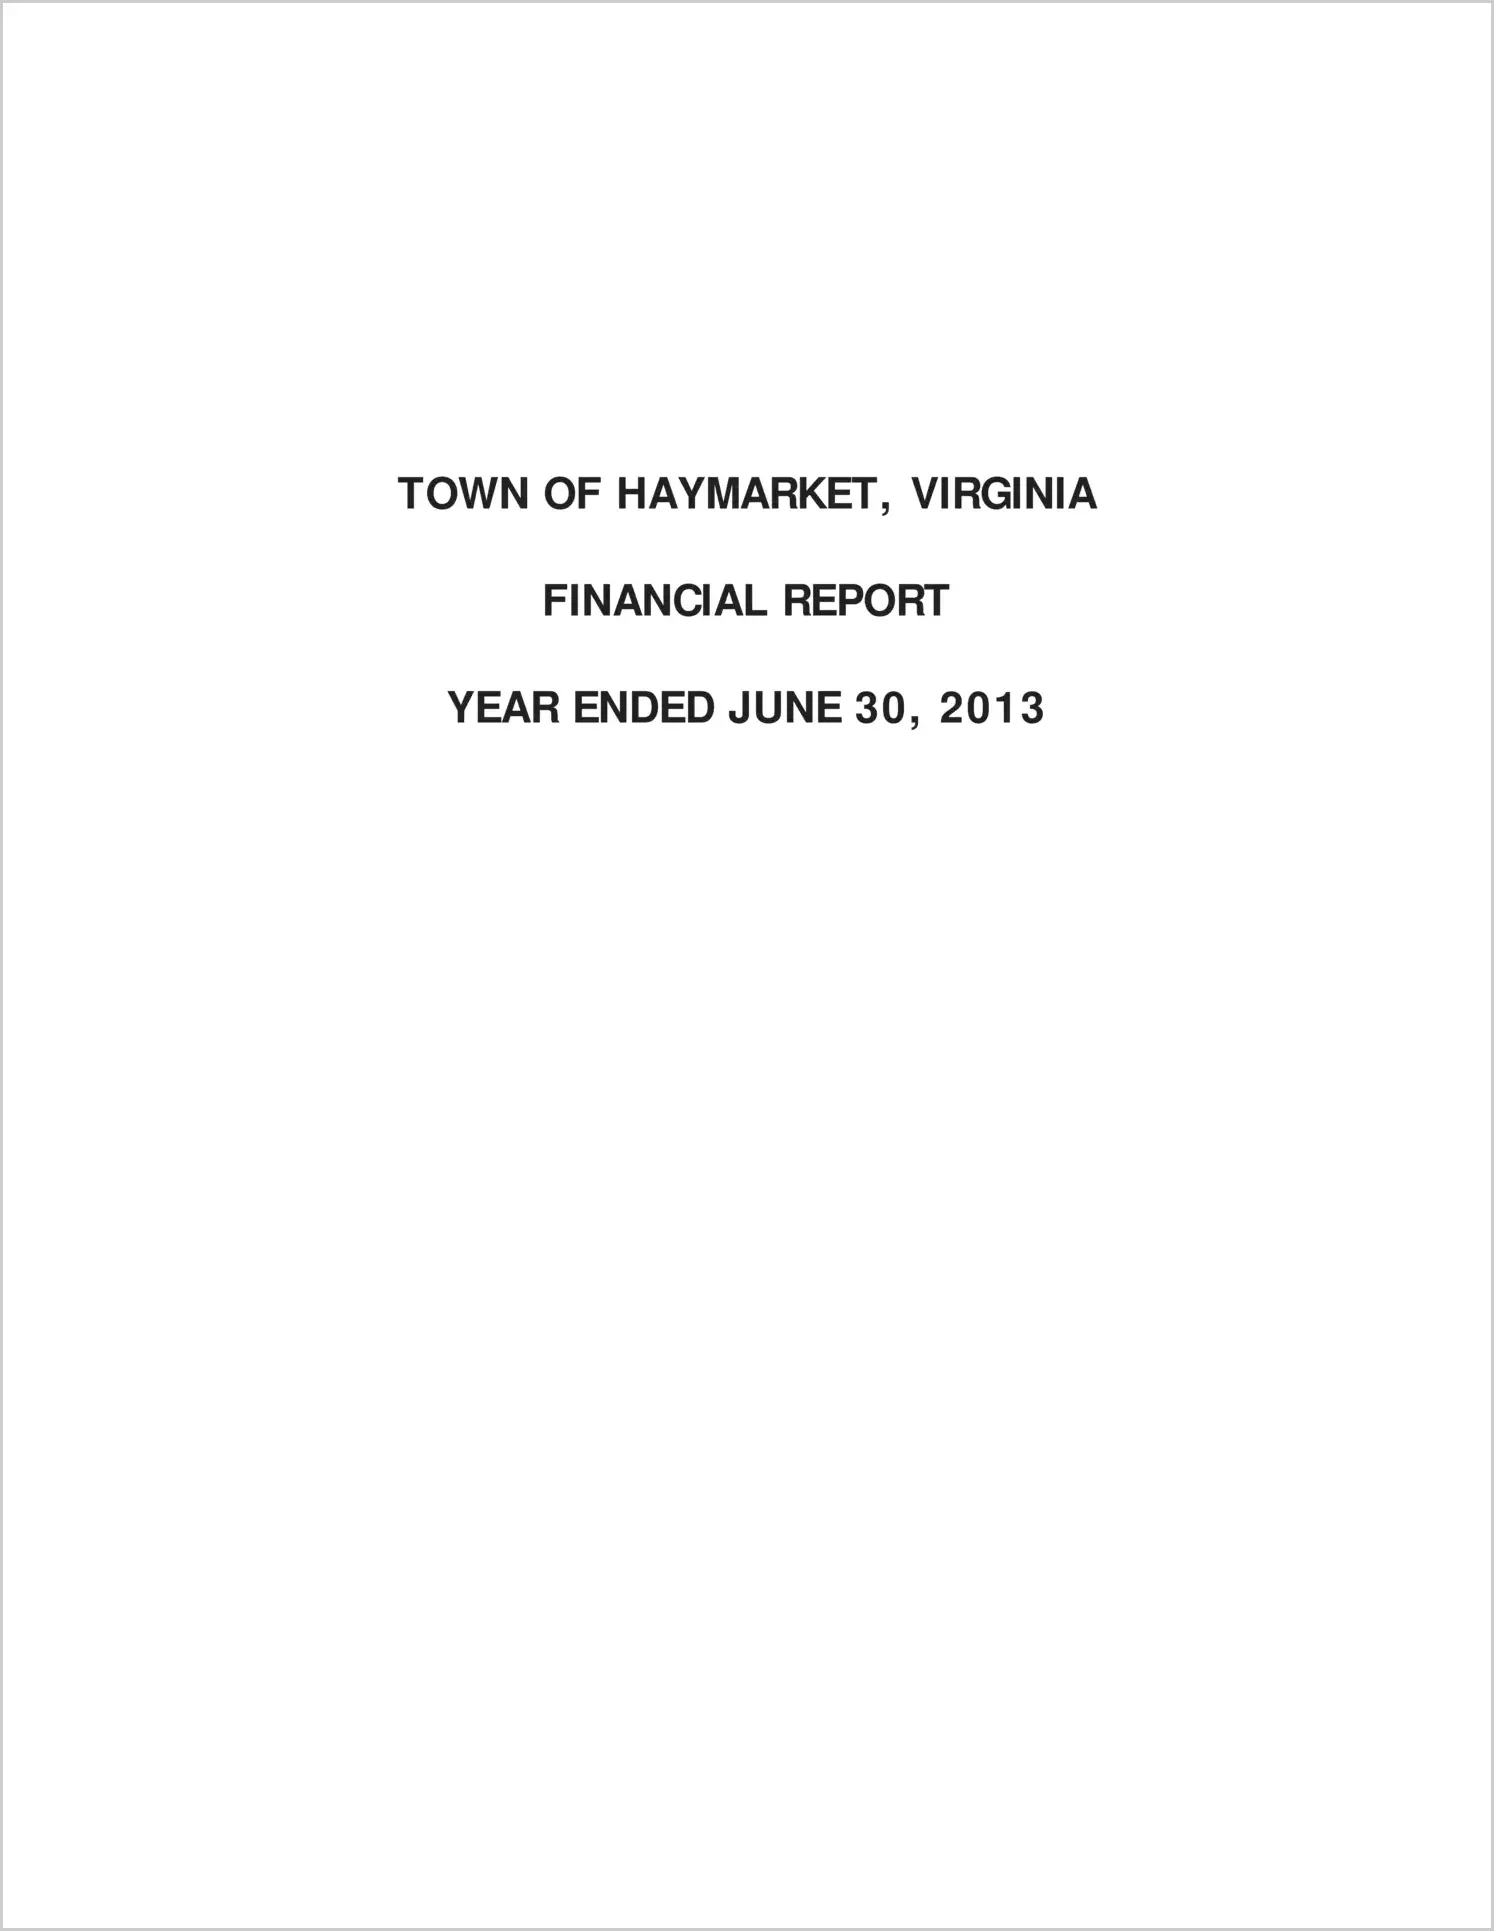 2013 Annual Financial Report for Town of Haymarket